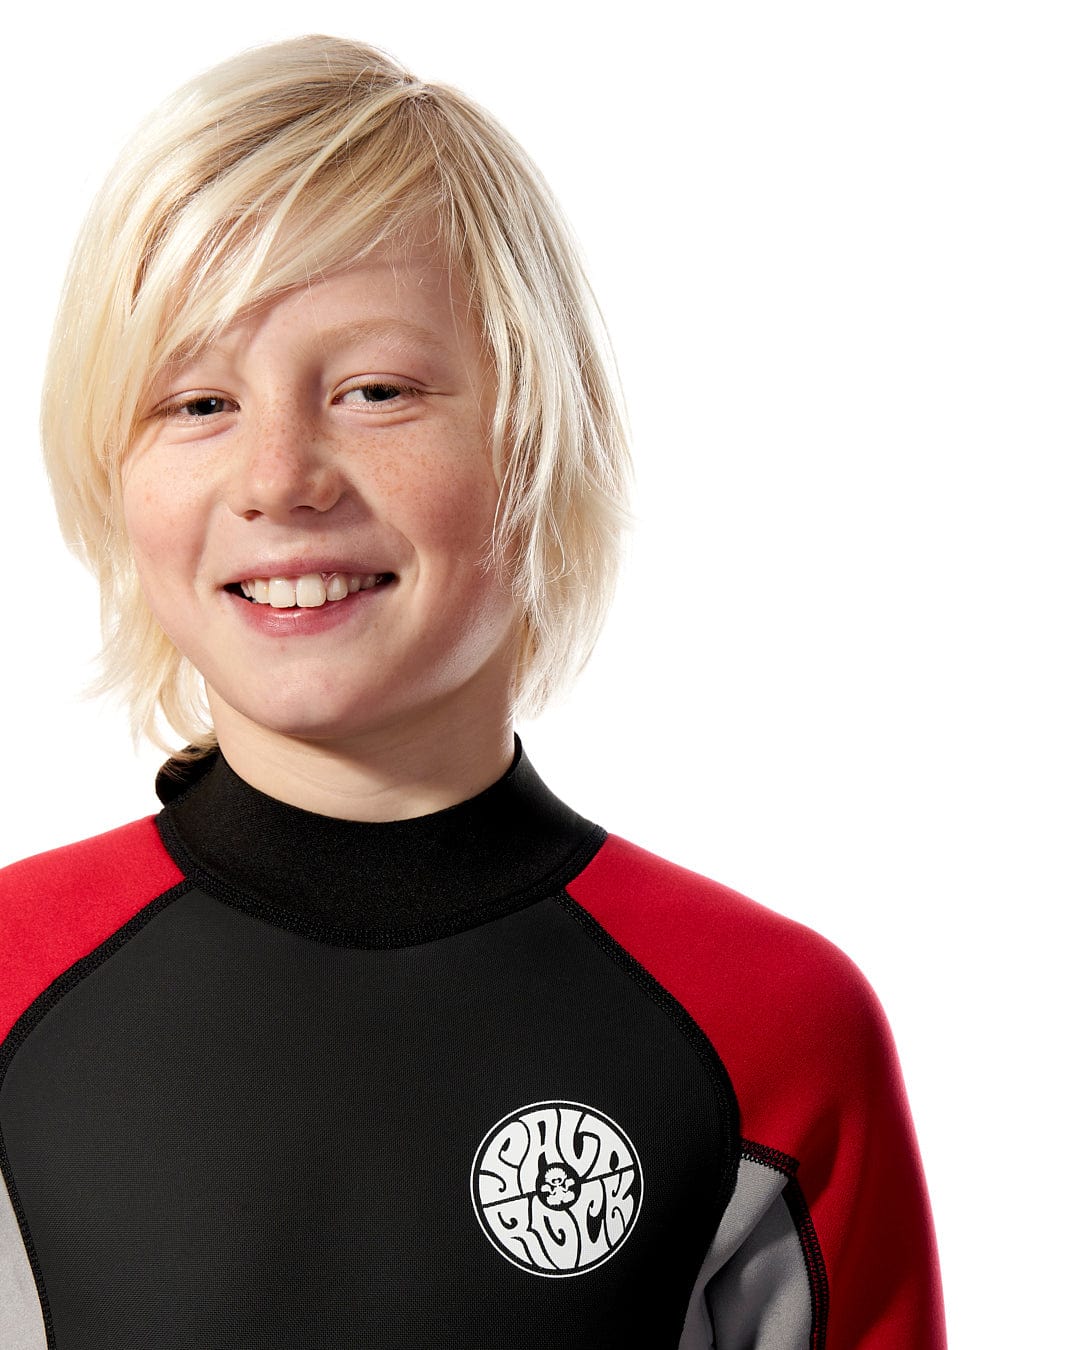 A smiling young boy with blond hair wearing a Saltrock Core - Boys 3/2 Shortie Wetsuit in Black/Red, standing against a white background.